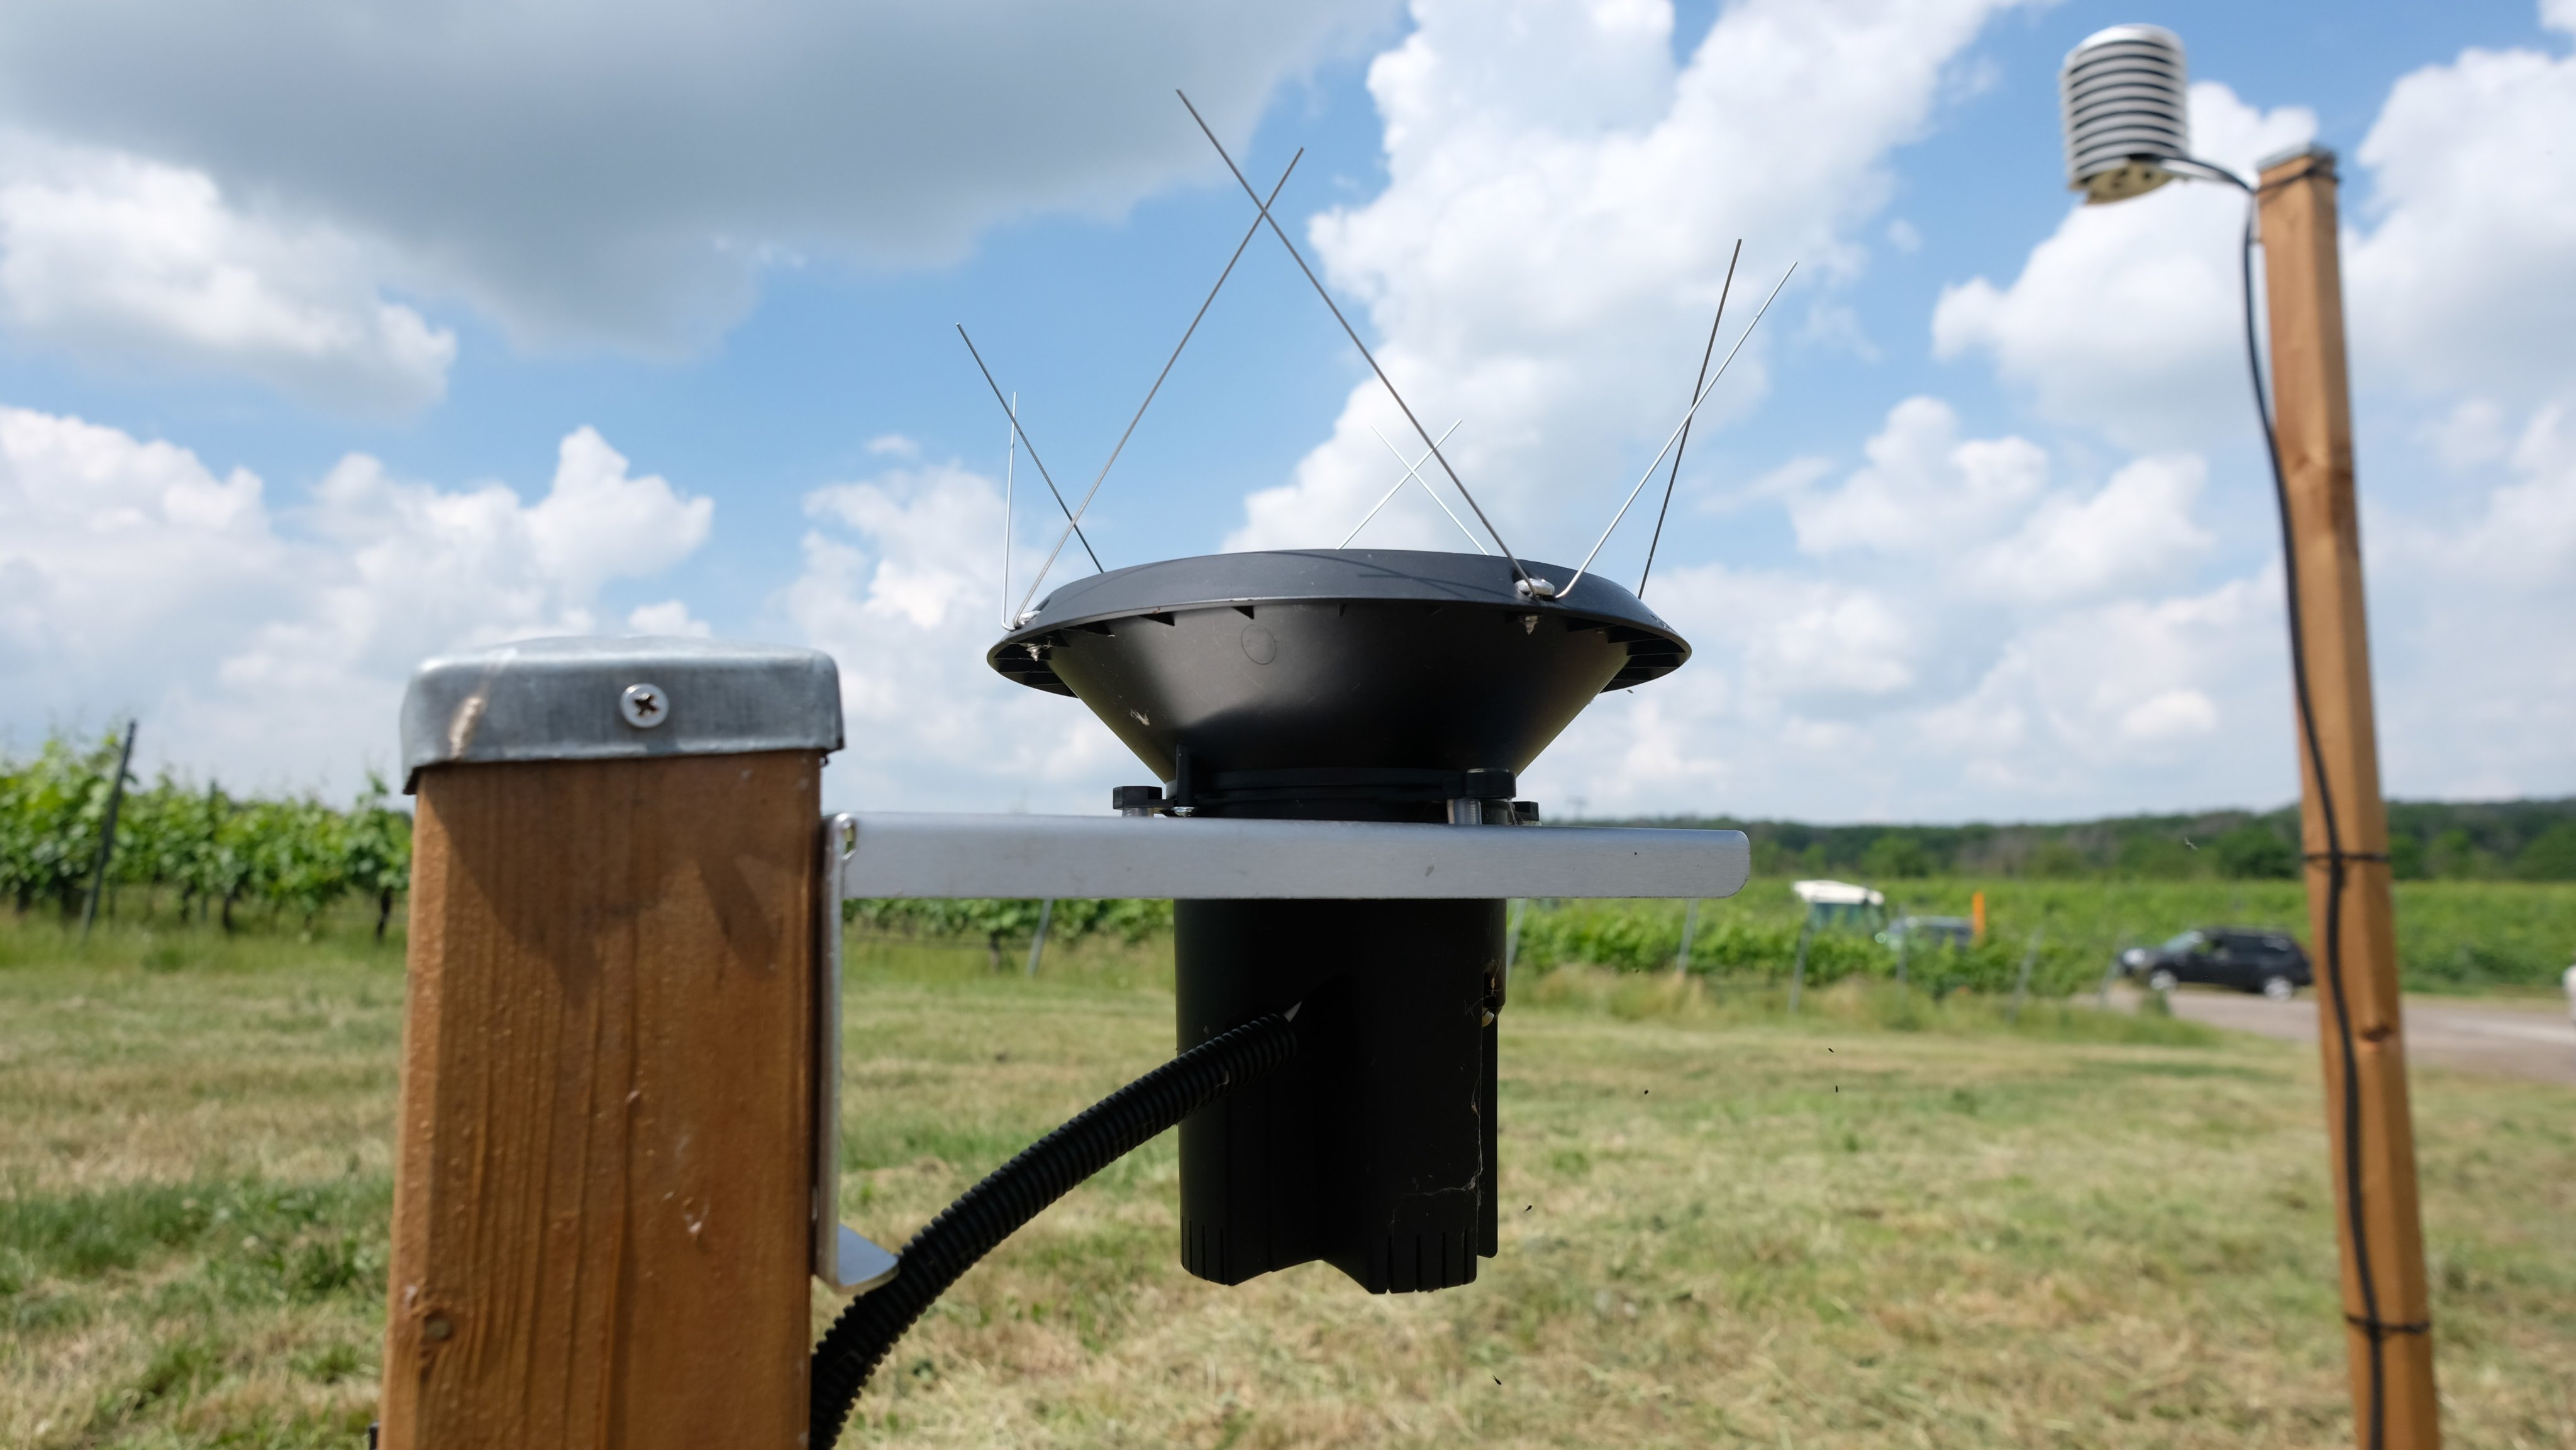 New weather station at Saale-Unstrut